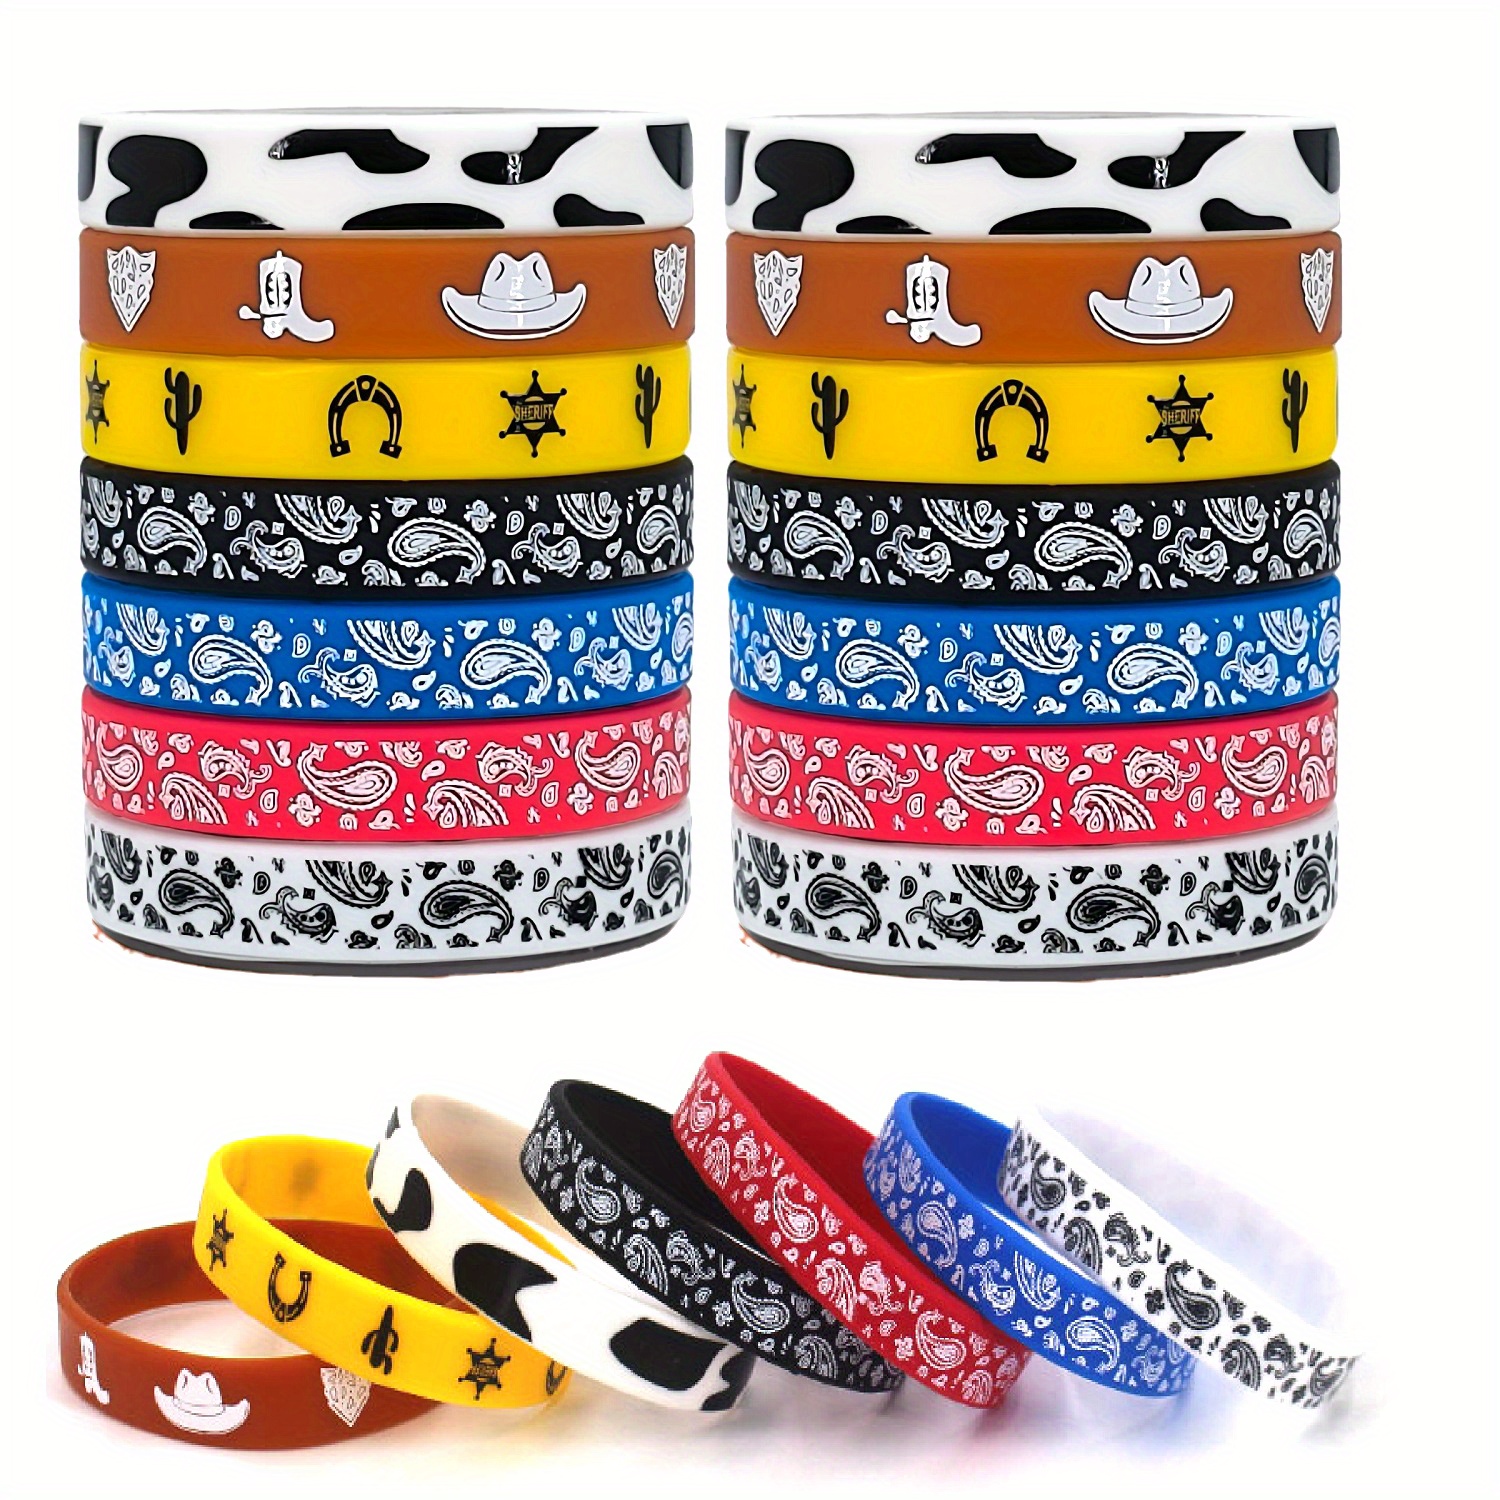 

14-piece Western Party Silicone Wristbands Set - Vibrant Stretch Bracelets For Birthday & Themed Celebrations, Assorted Colors